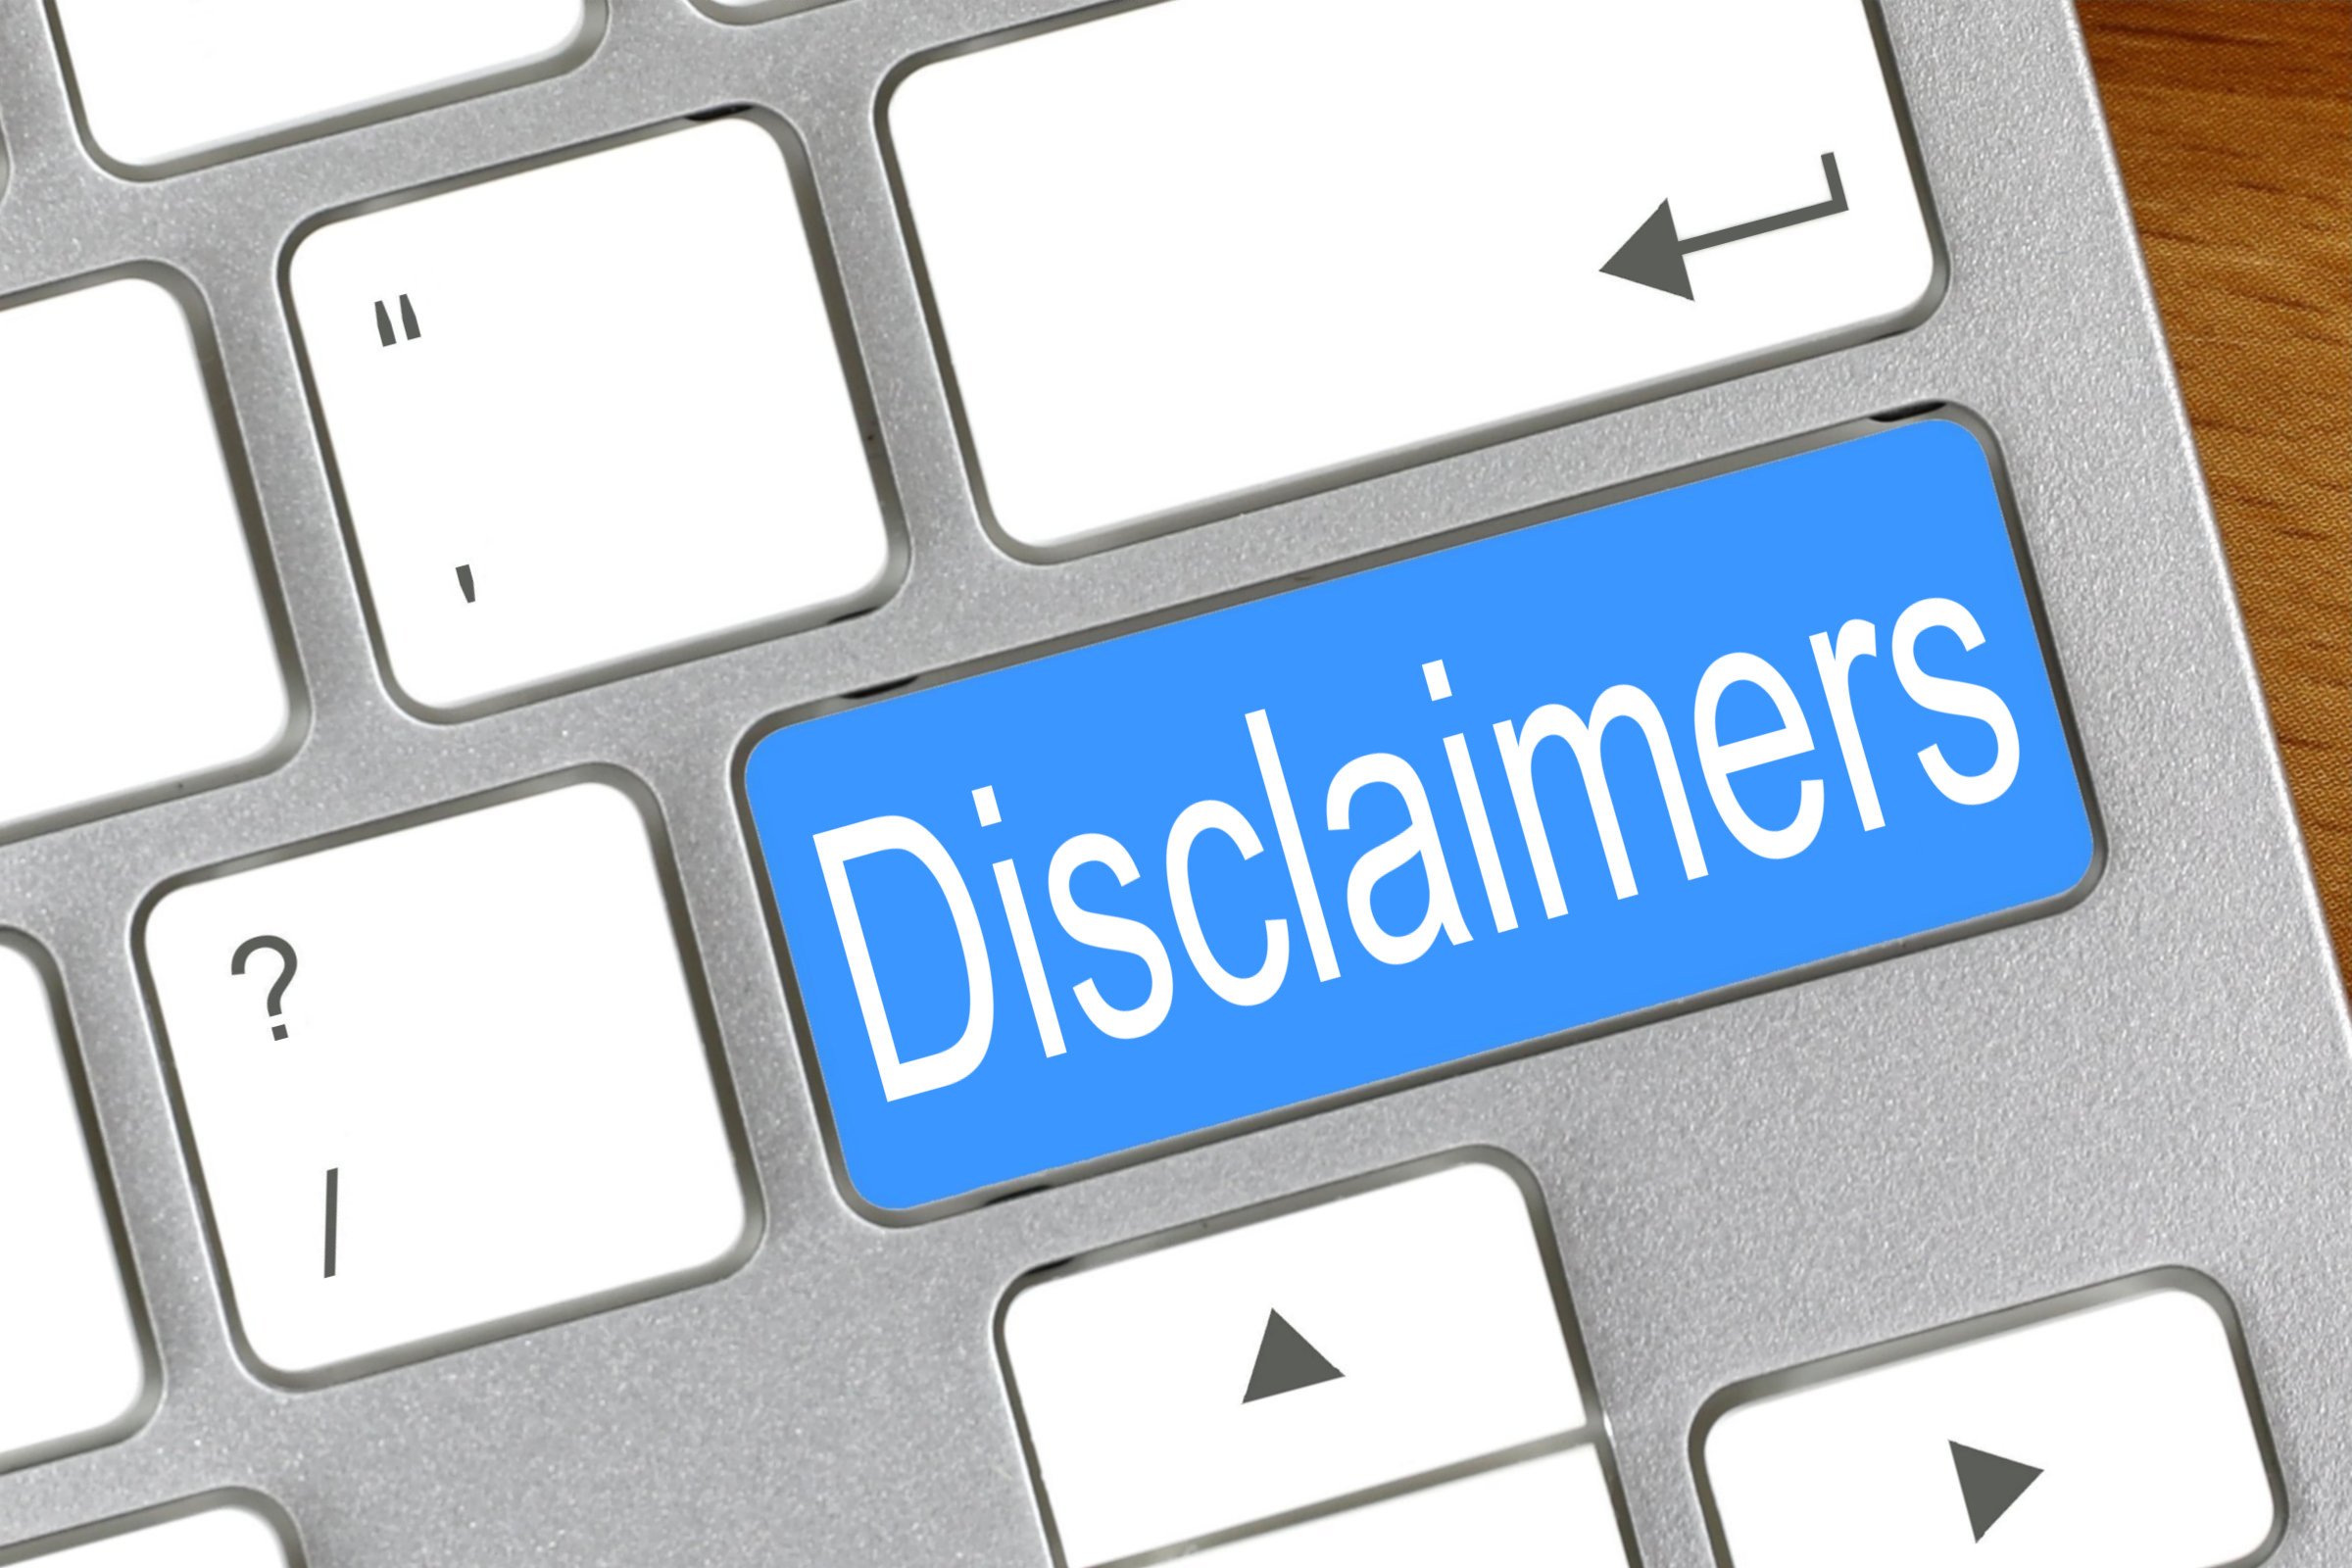 disclaimers